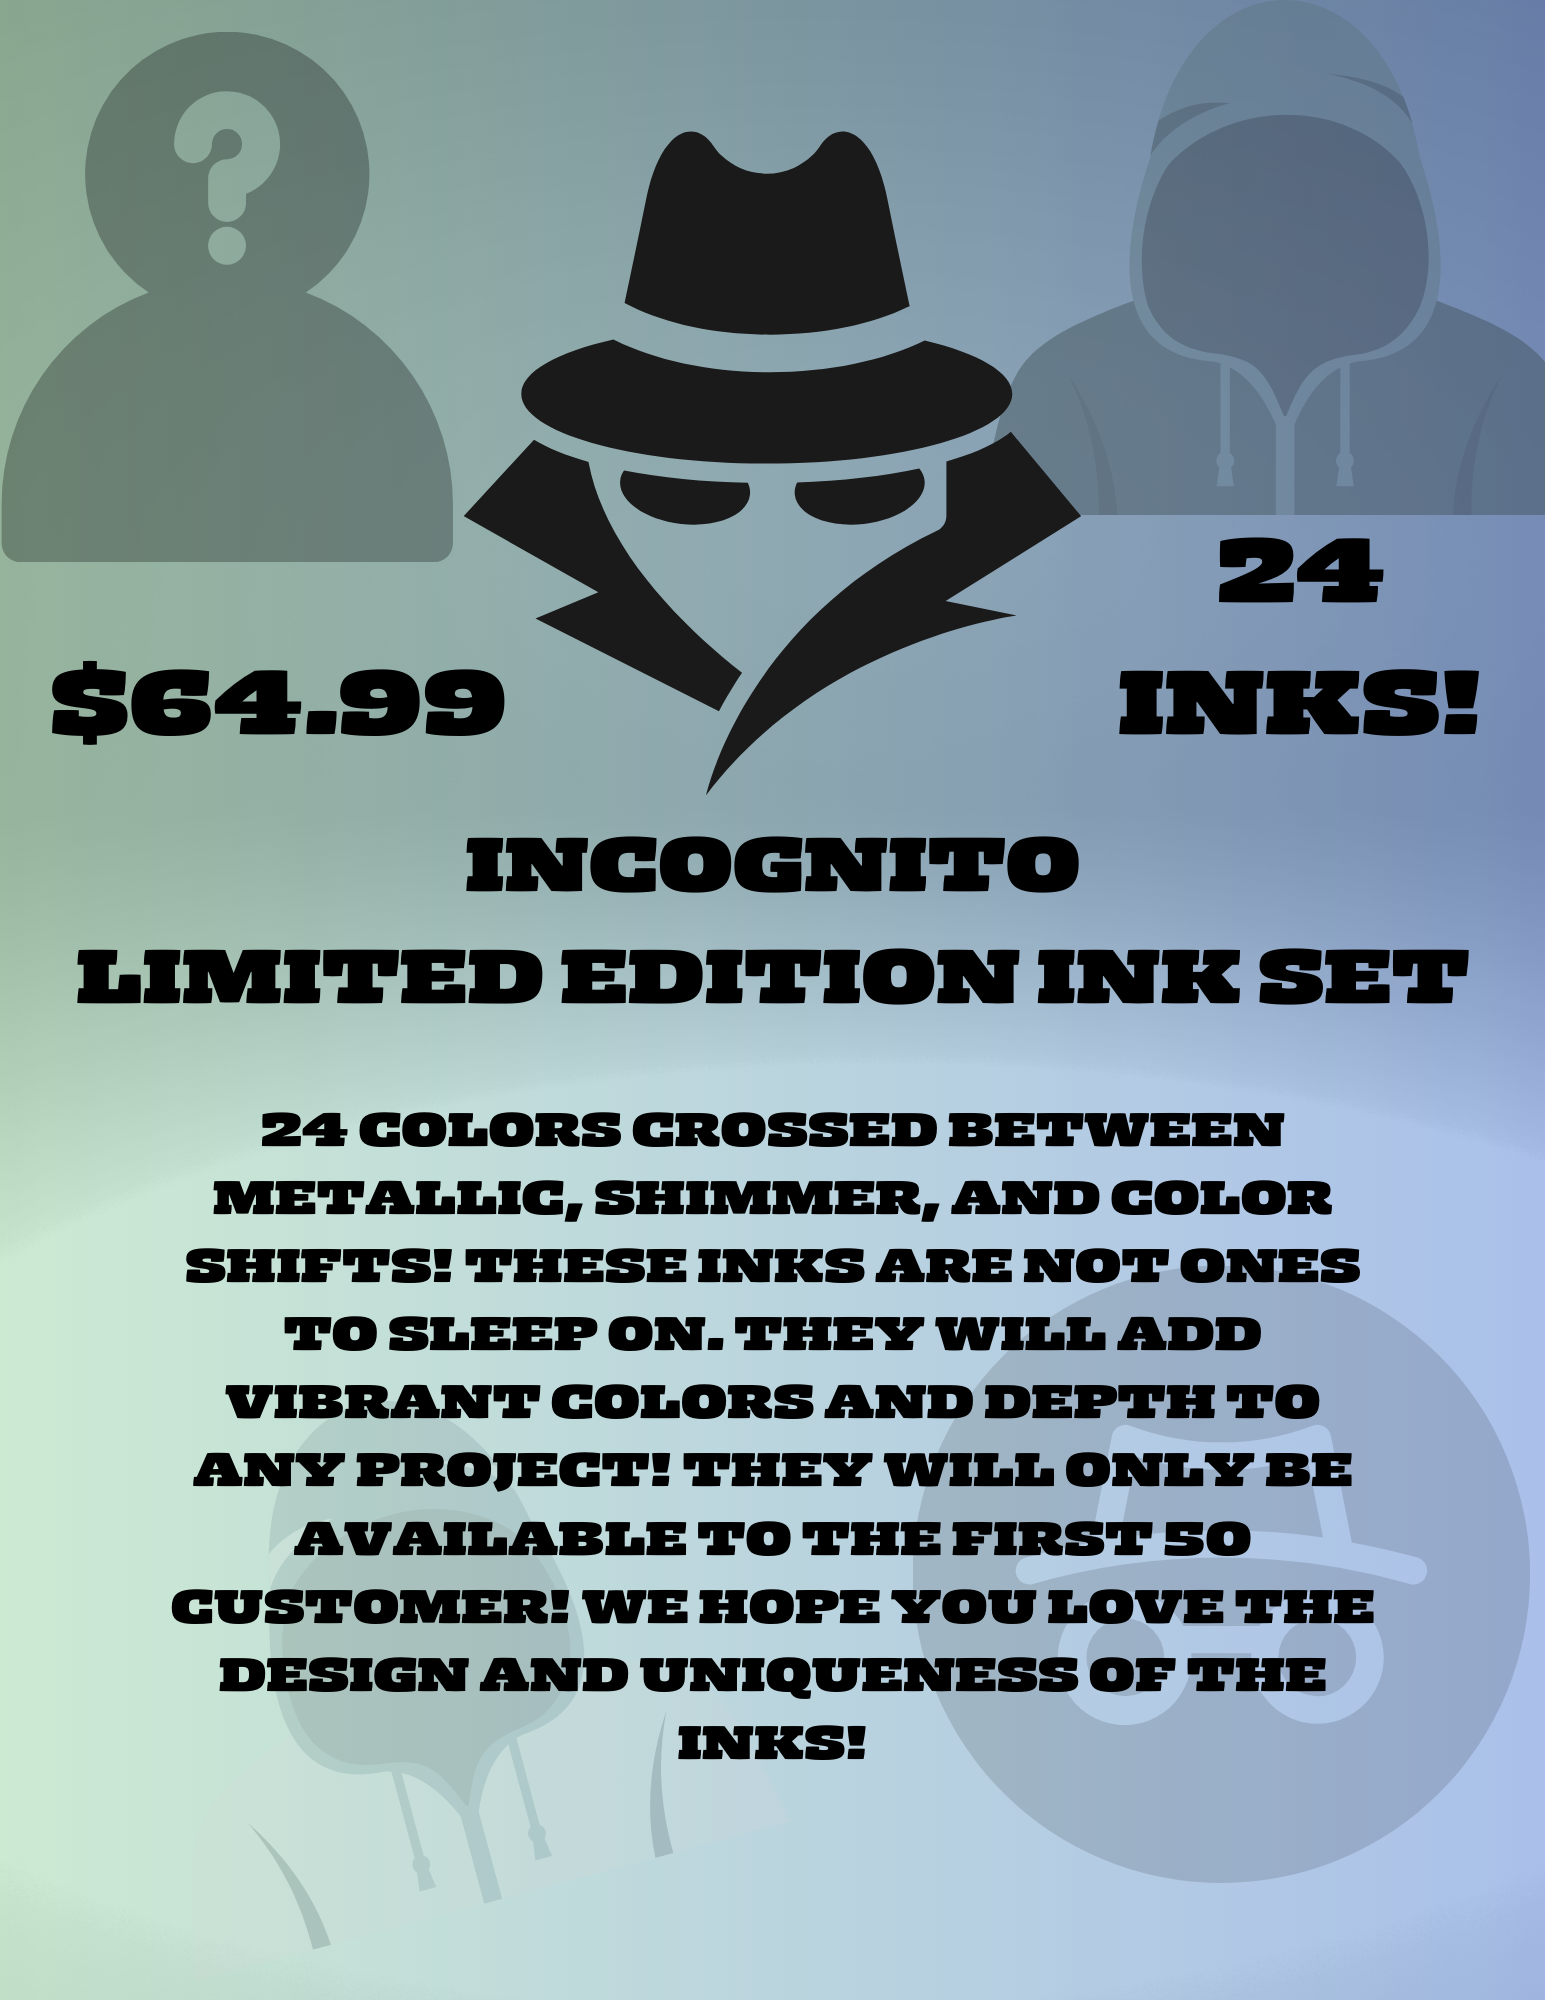 Incognito Limited Edition Ink Set